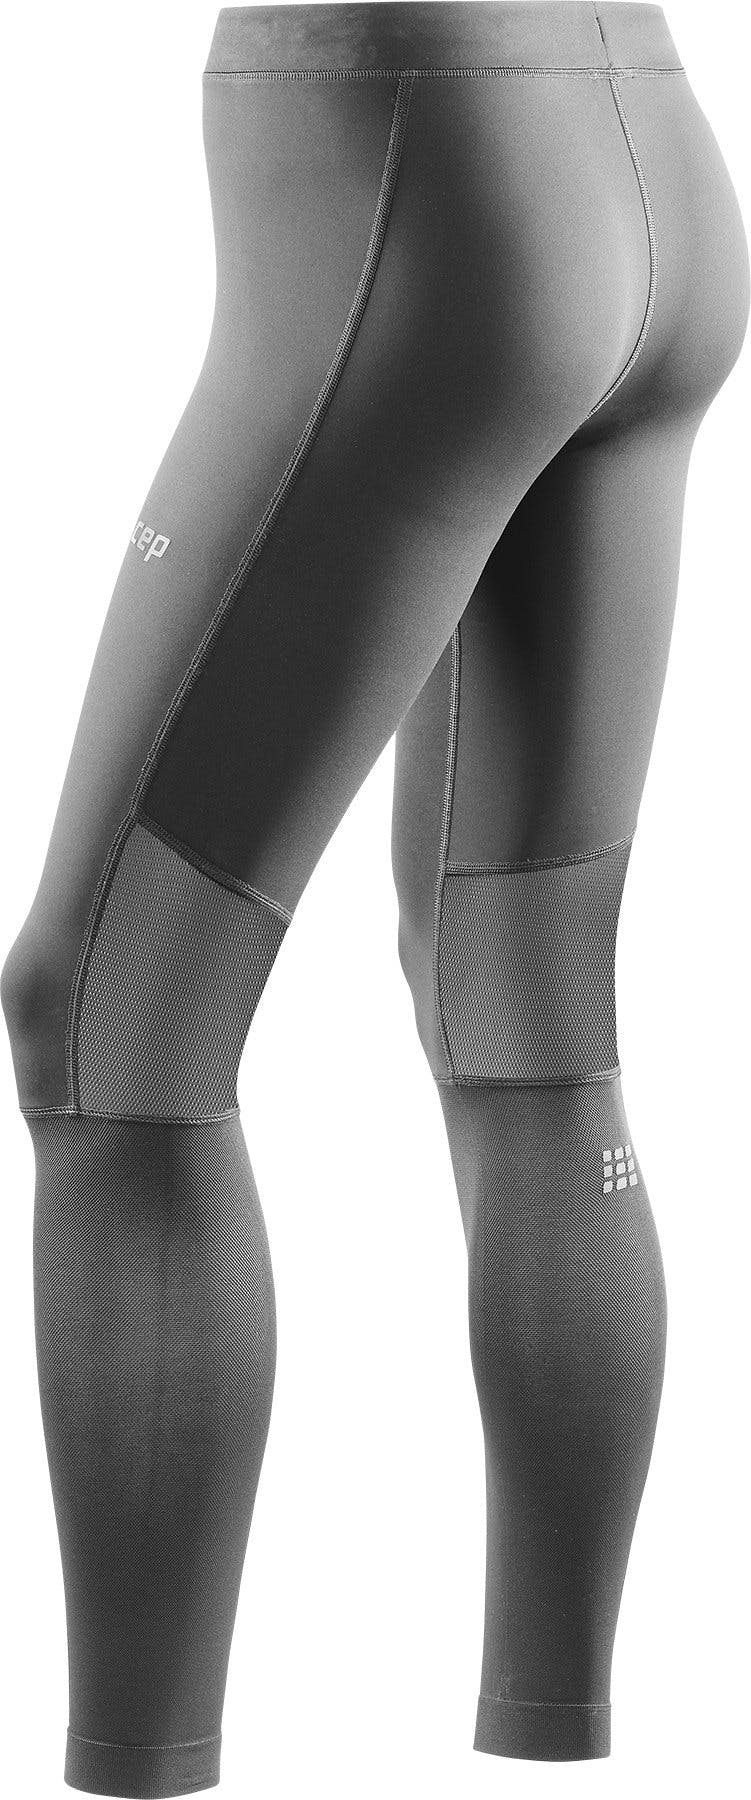 Product image for Full Compression Training Tights - Men's